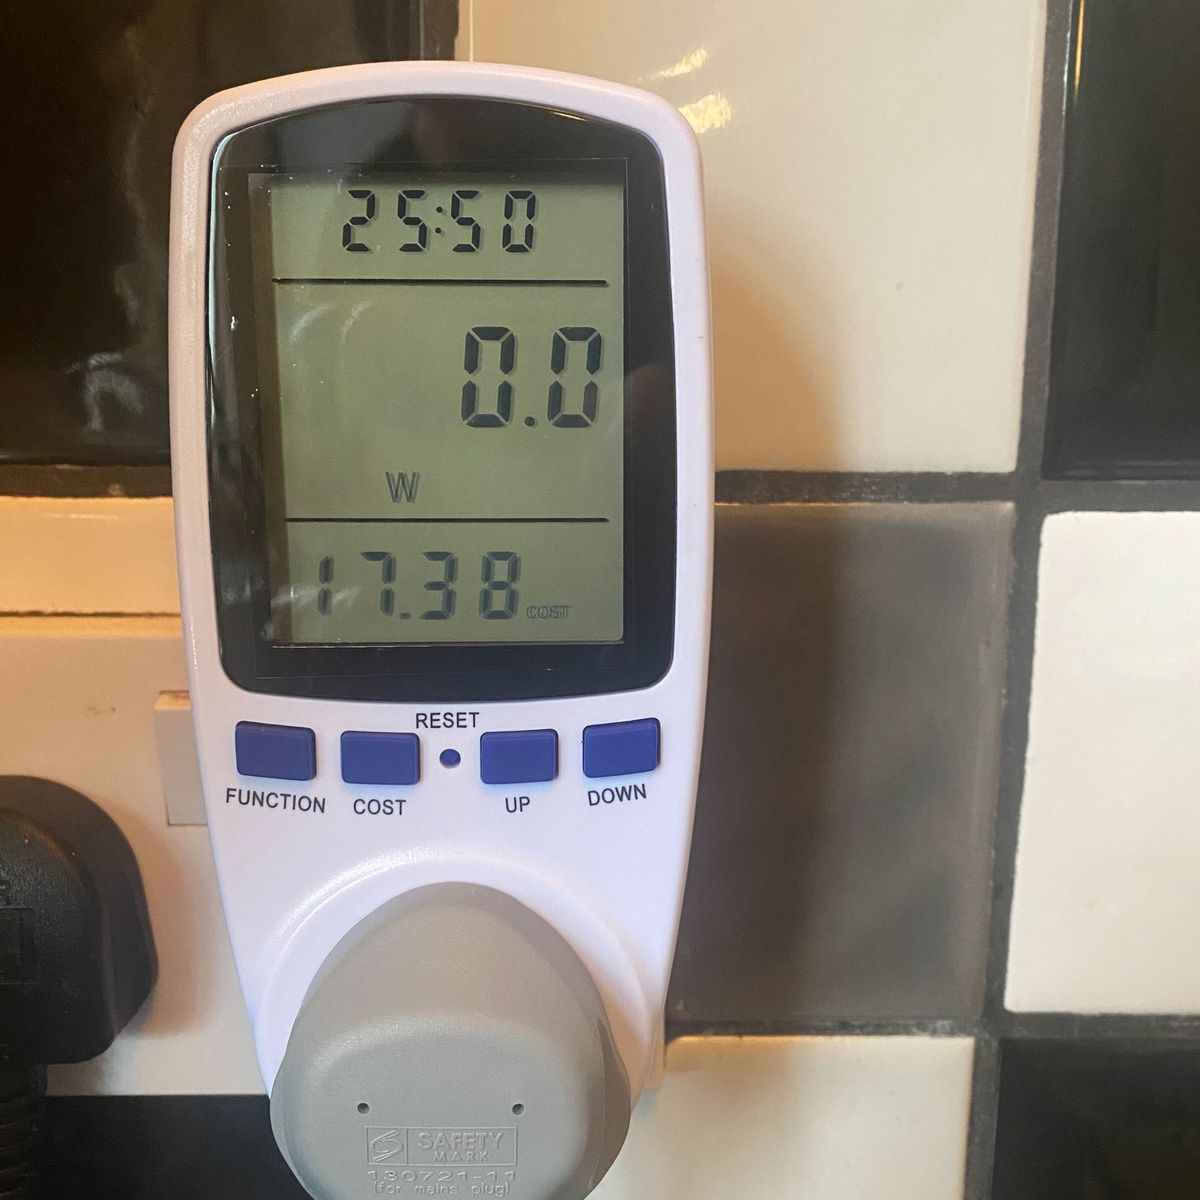 I tried an energy monitoring plug for a week and was surprised how much energy this appliance was guzzling